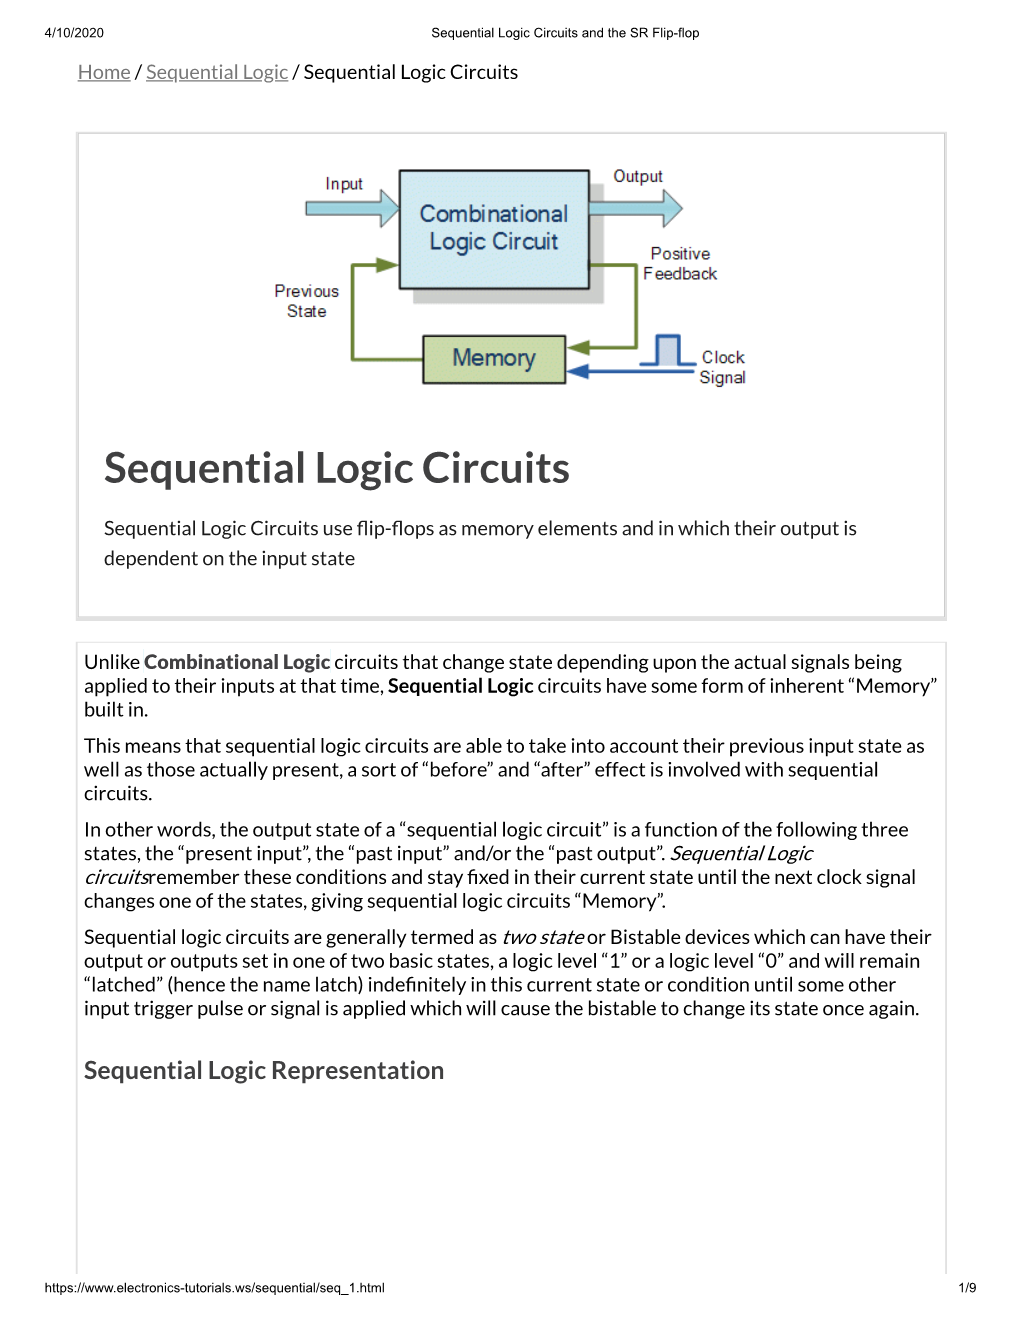 Sequential Logic Circuits and the SR Flip-Flop